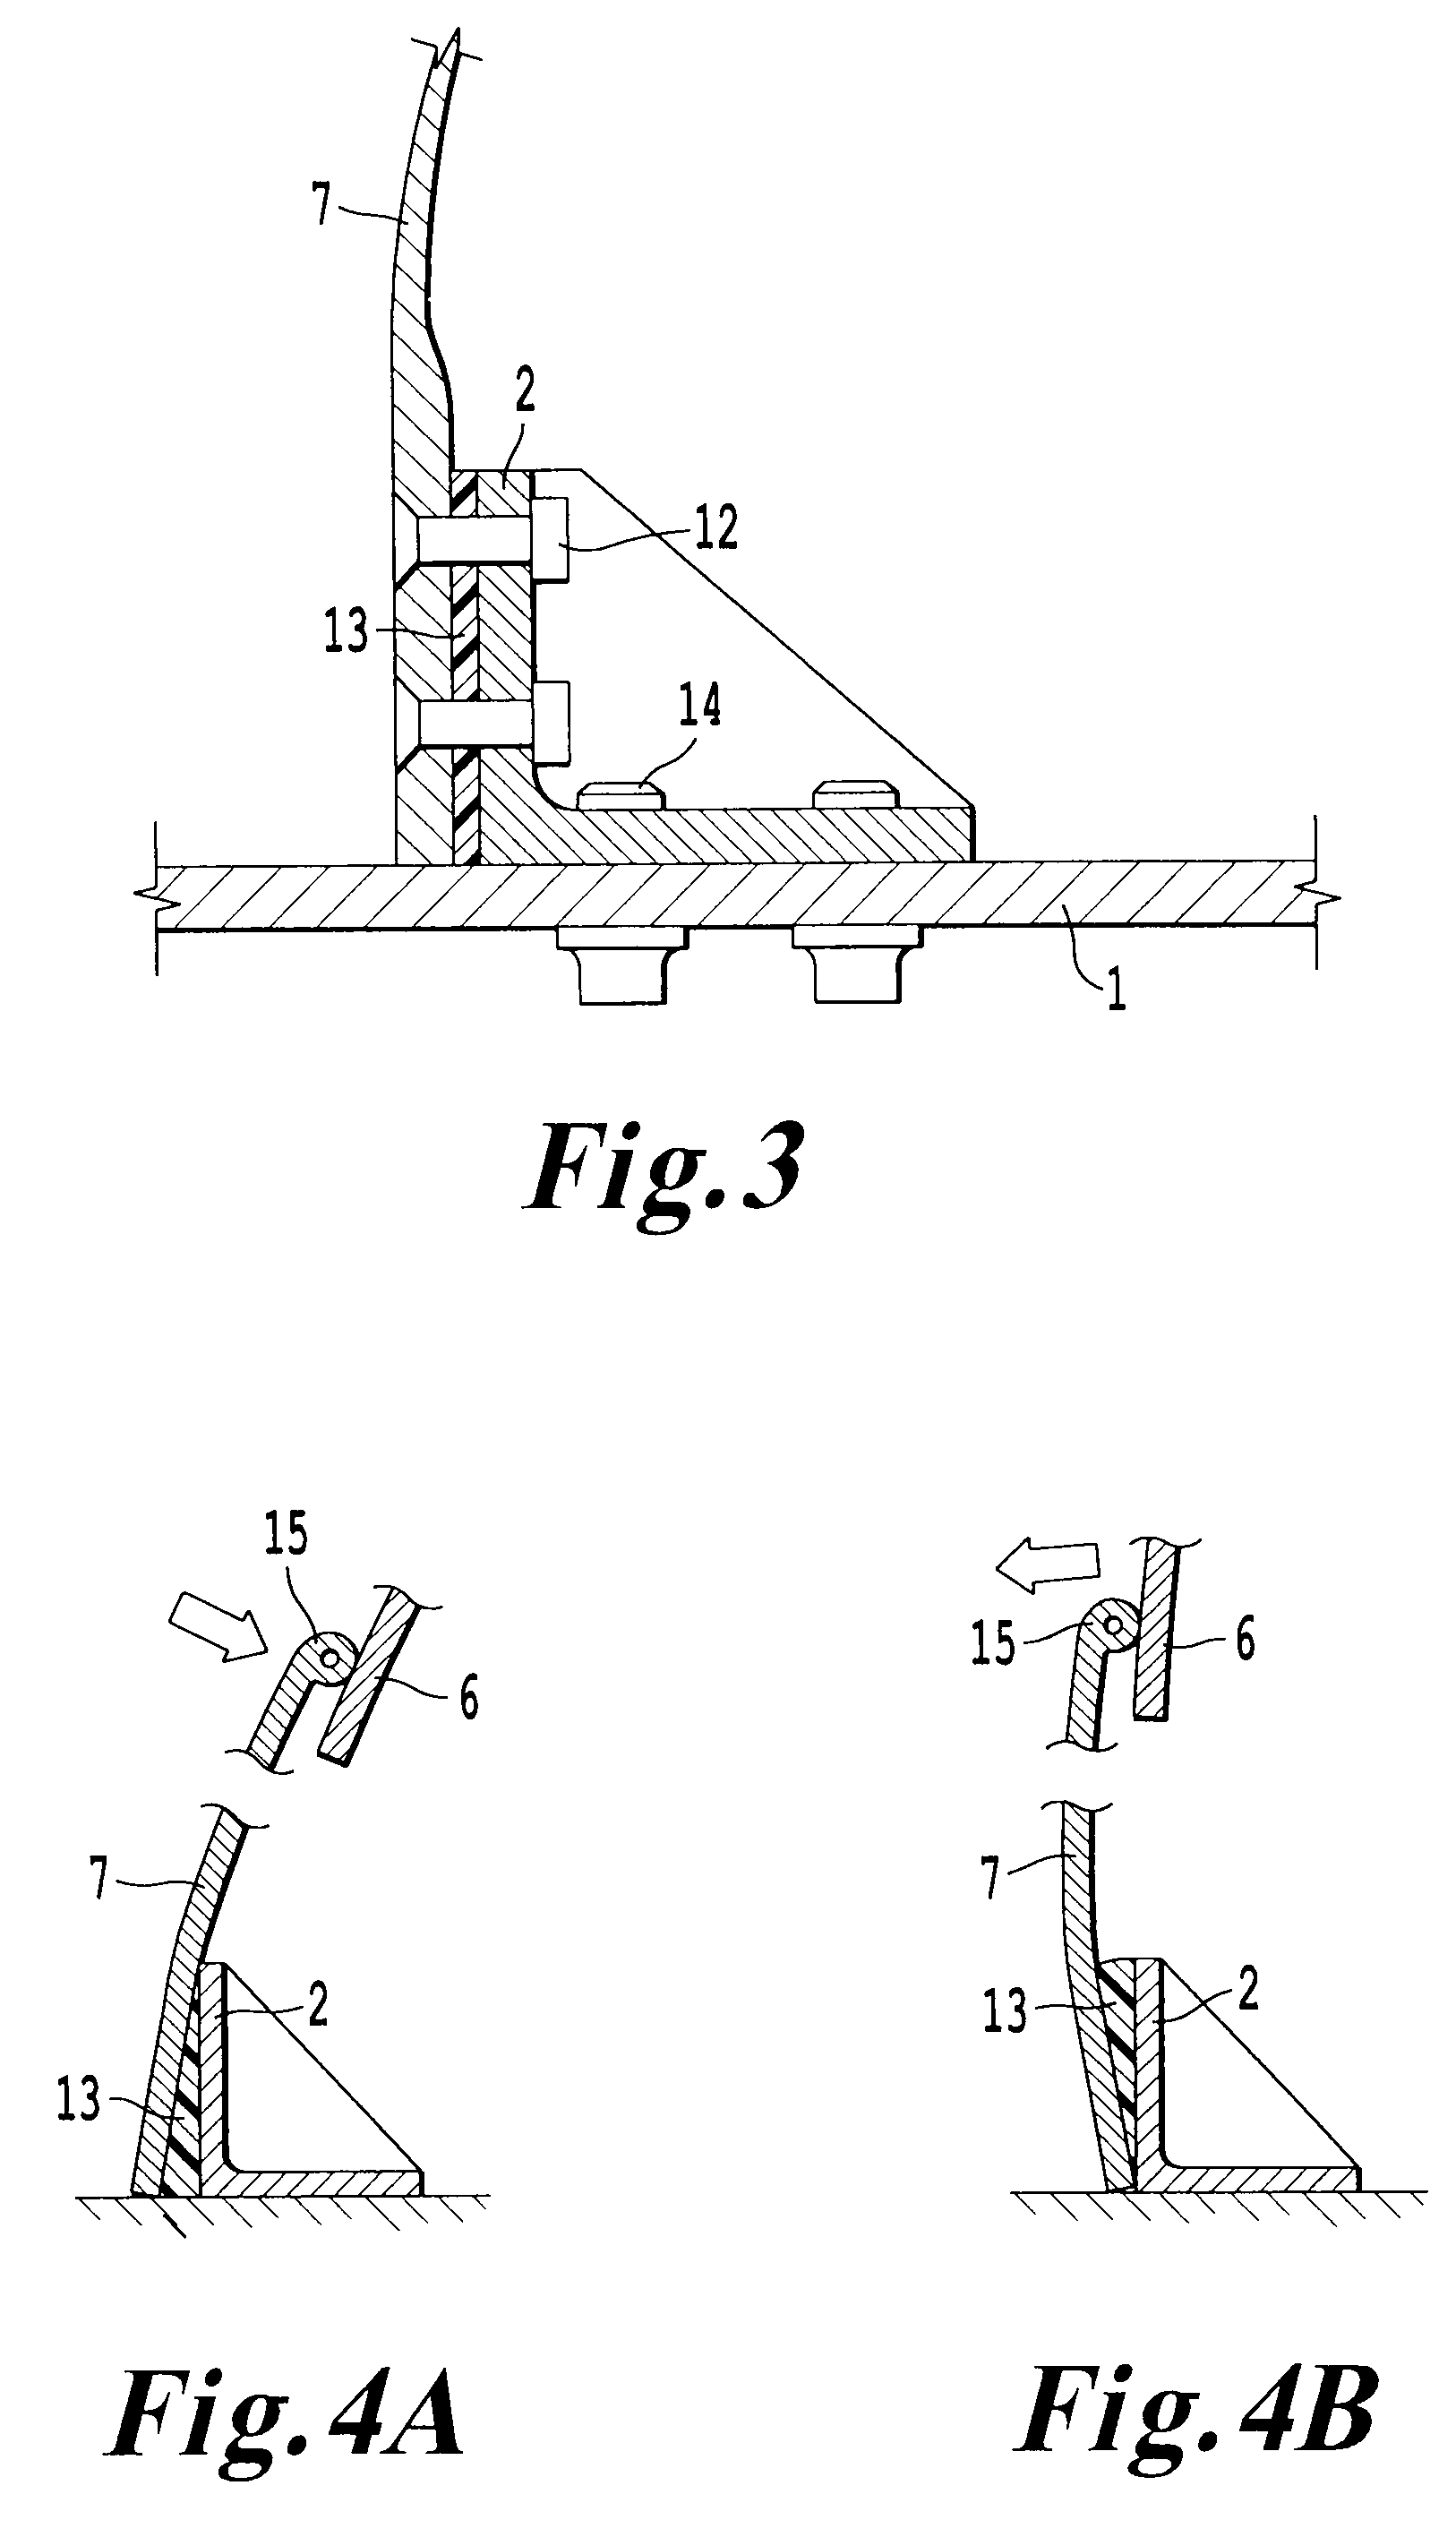 Integrative structure for aircraft fairing